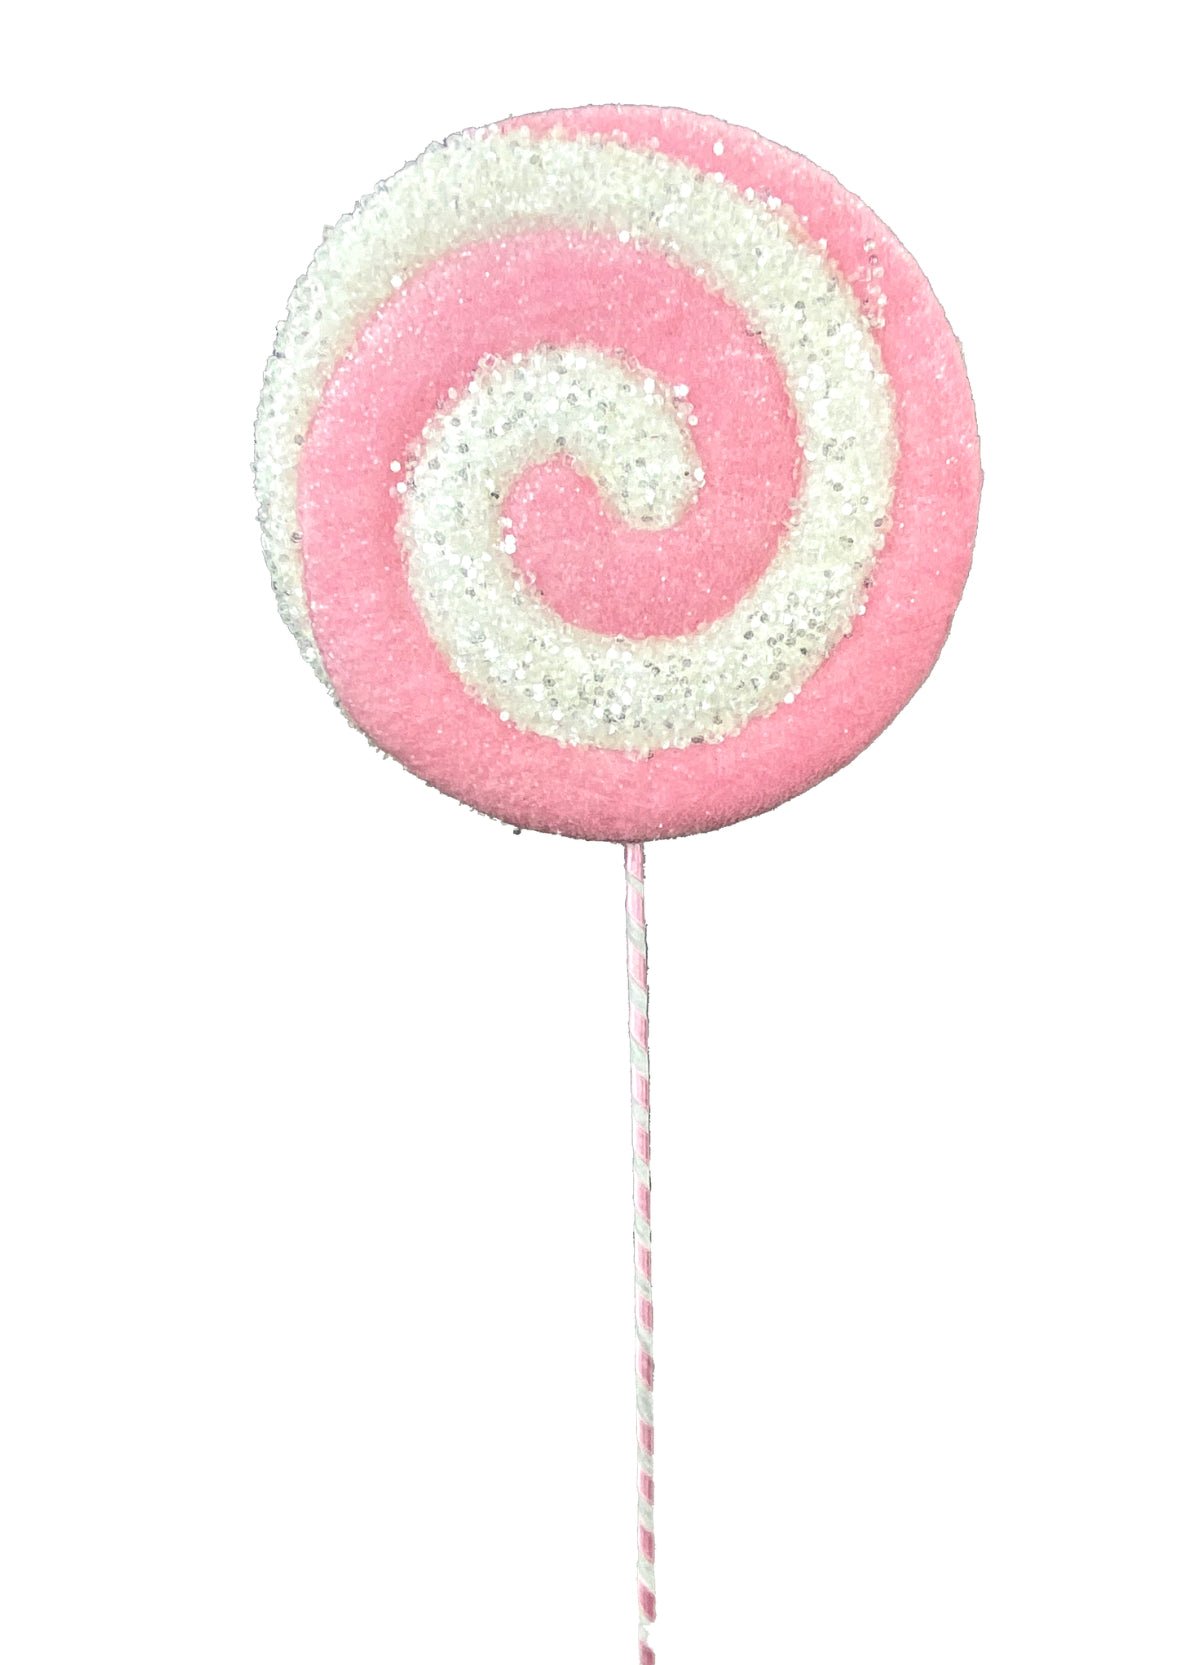 Large, pink Faux lollipop with shimmer - Greenery MarketOrnaments85245pkwt